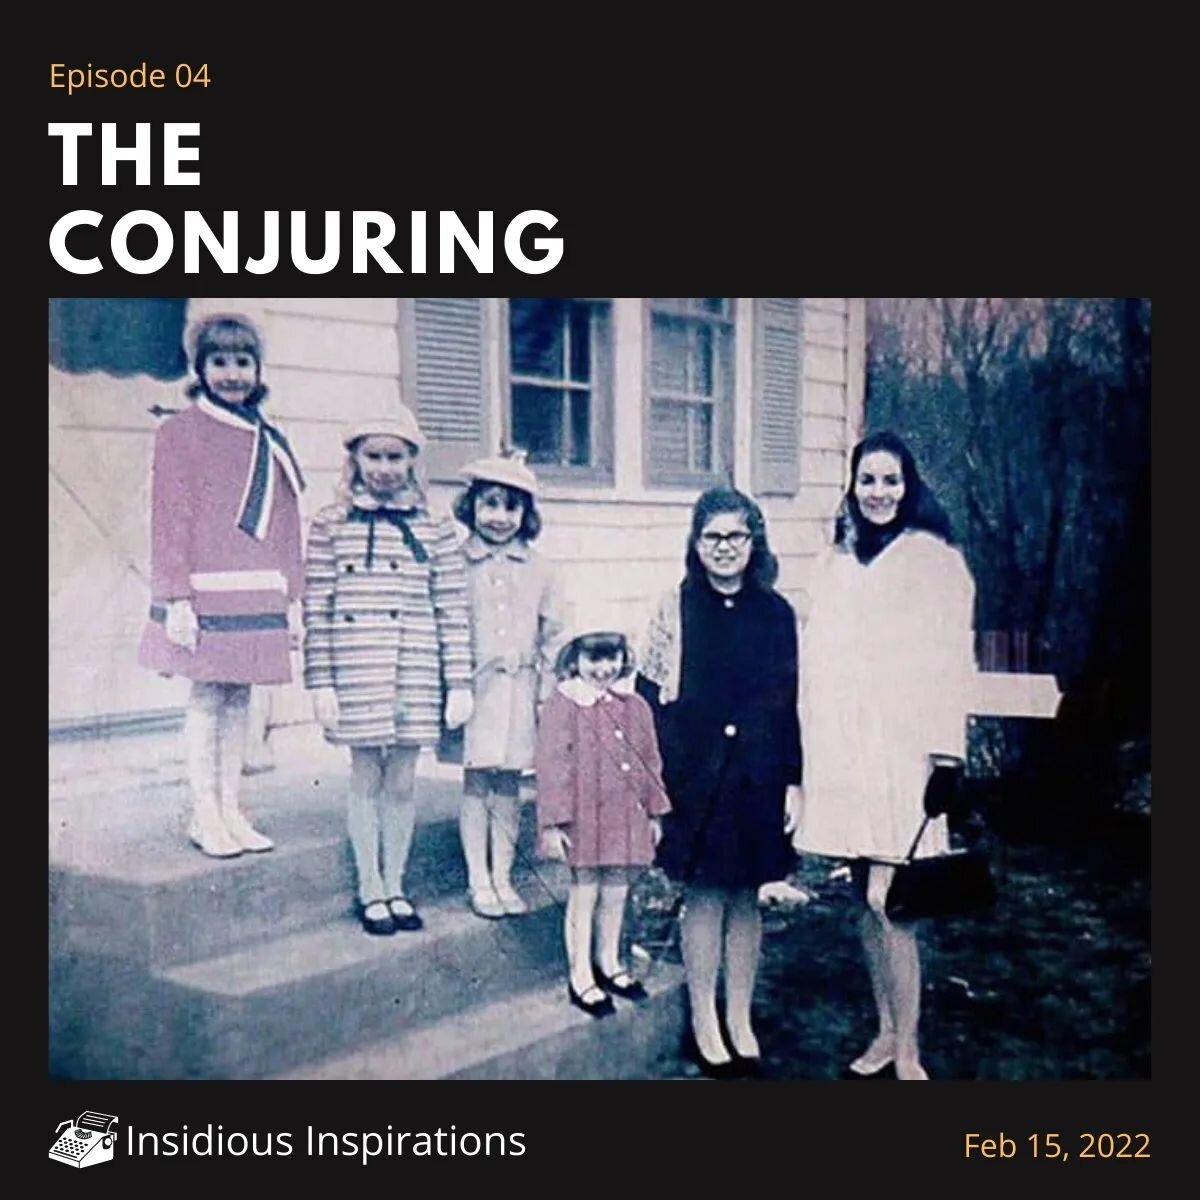 This week we're diving into the #Conjuring series! Discover the true story behind the Perron Family haunting!!! 

New episode available now!
#TrueCrime #InsidiousInspirations #conjuring #haunting #scary #truestory #podcast #bloodydisgusting